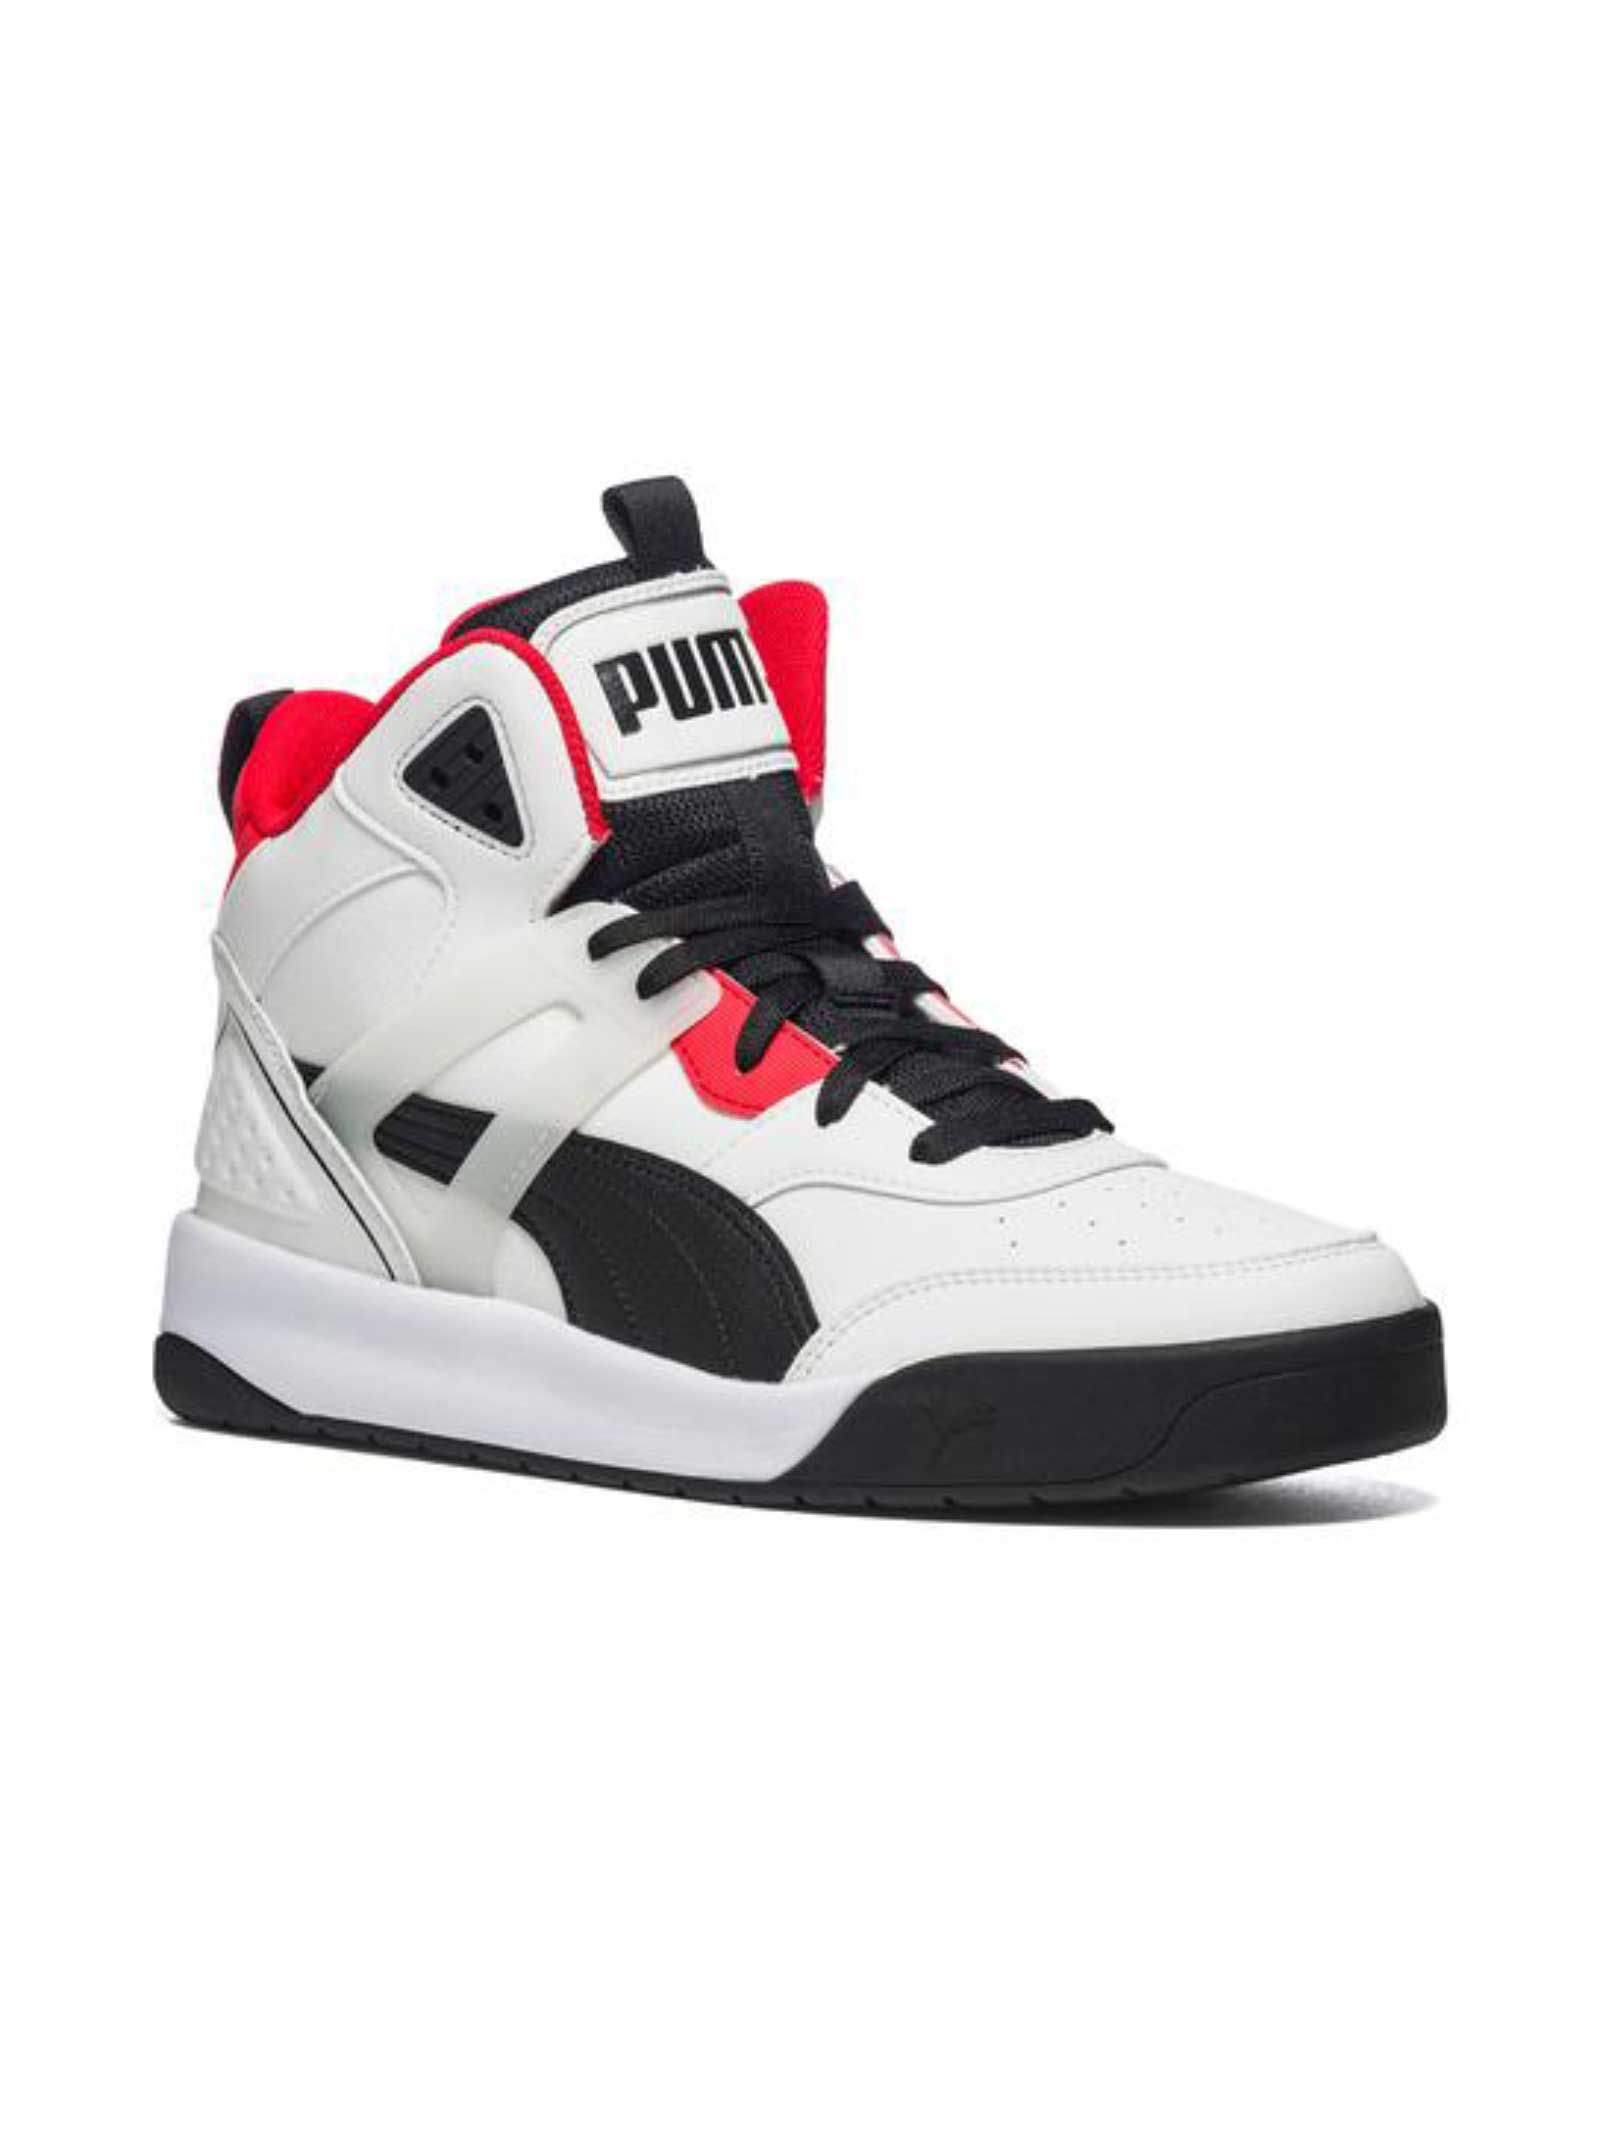 PUMA Backcourt Sneakers-White/Black/Red